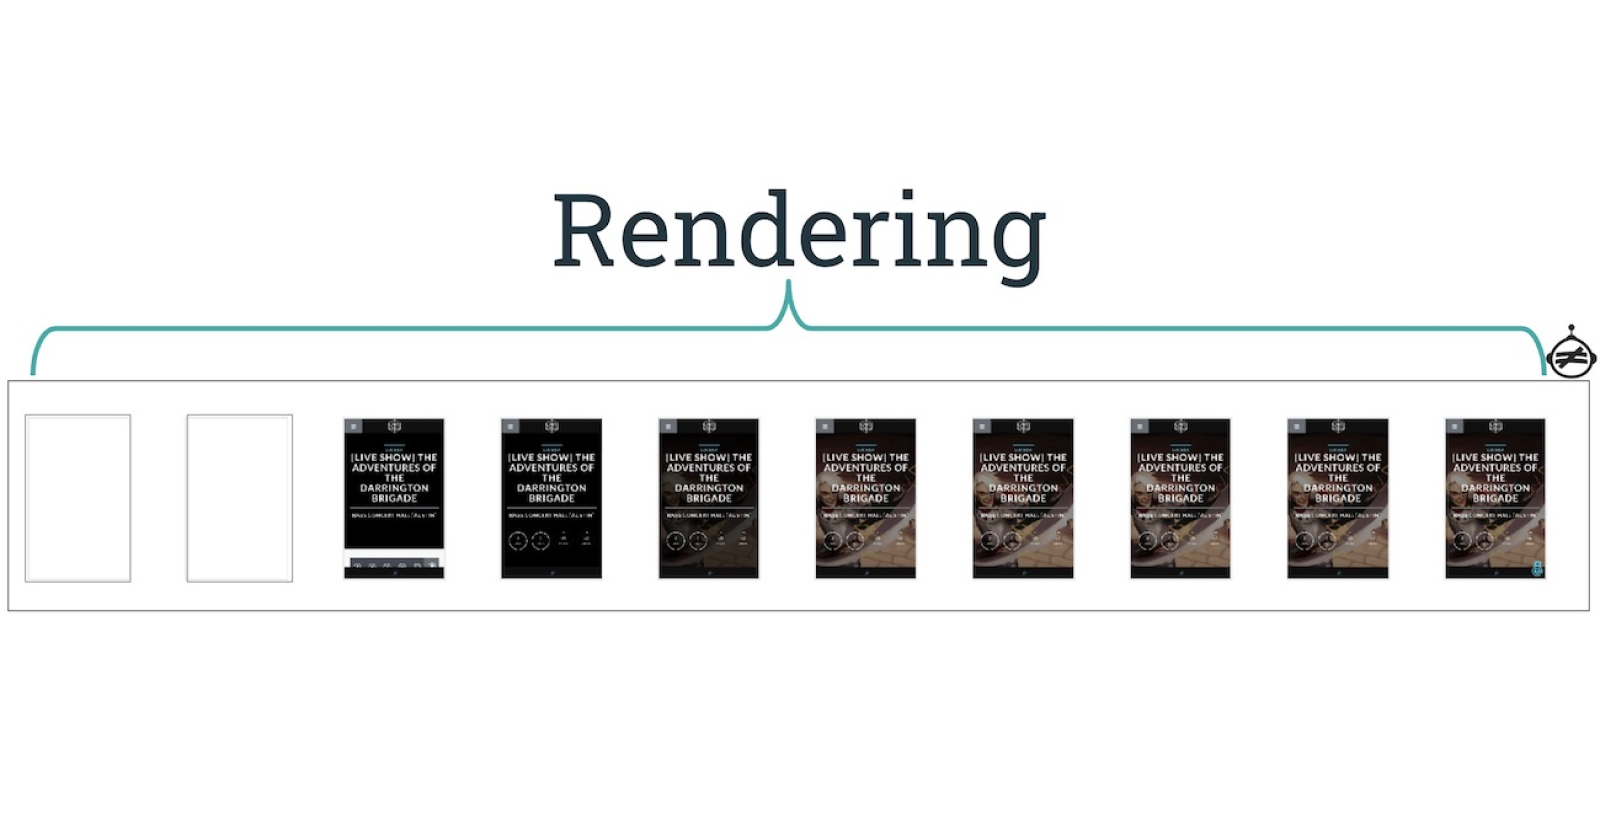 The SEO's Introduction to Rendering - Jamie Alberico